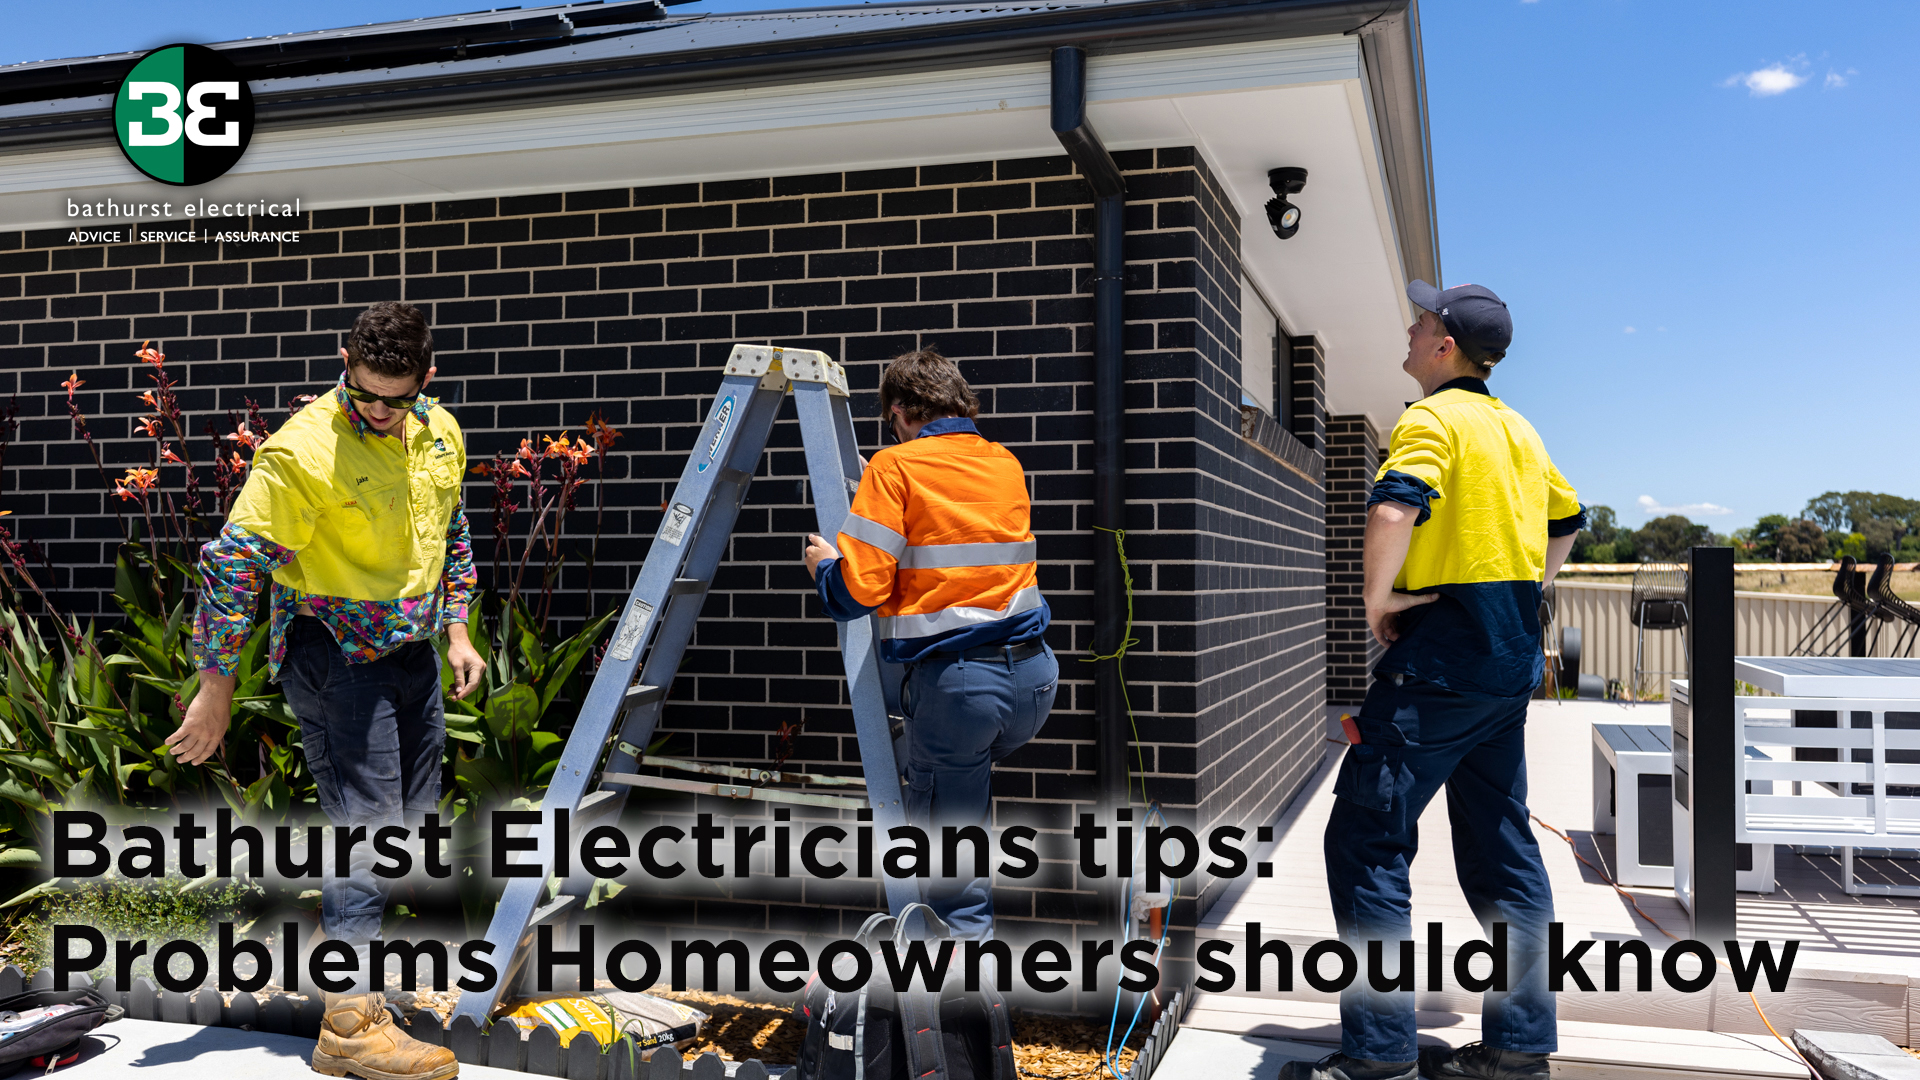 Bathurst Electricians tips: Problems Homeowners should know